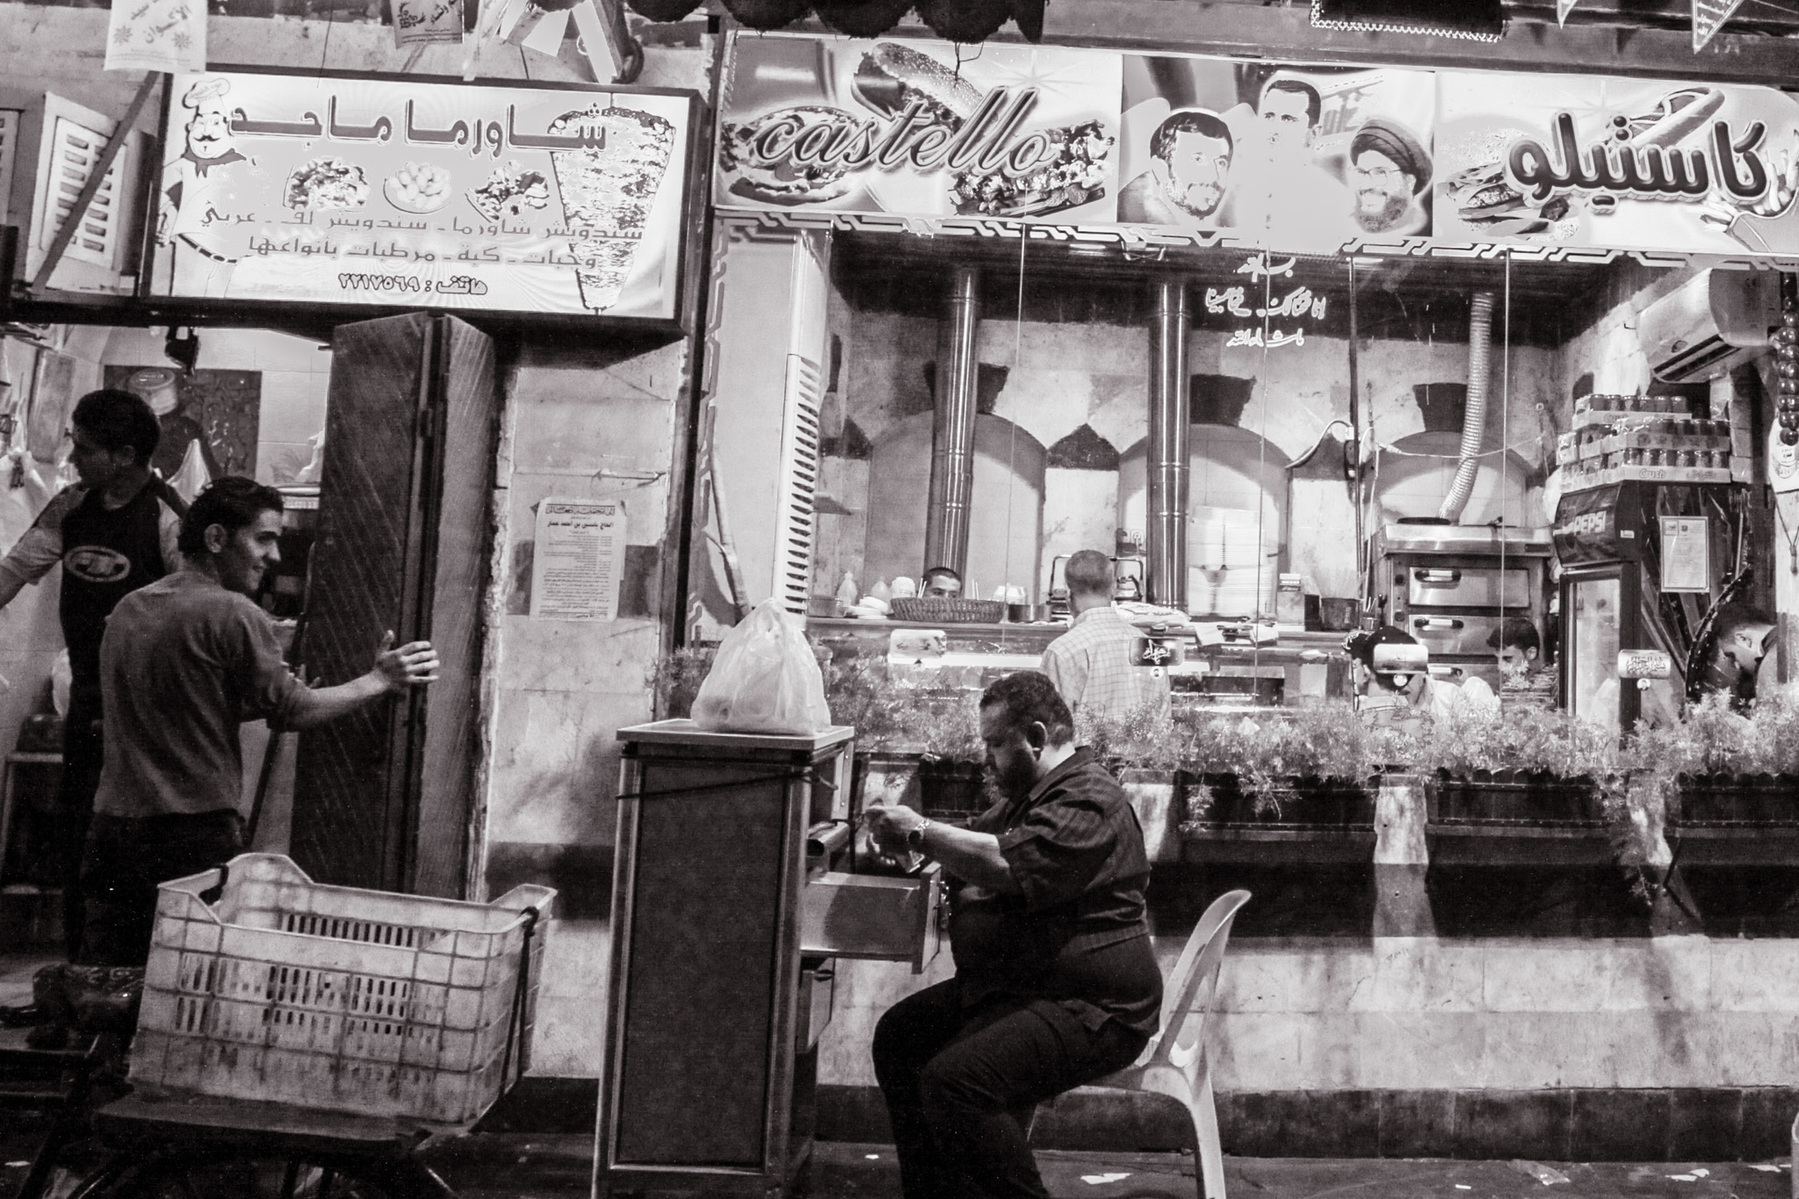 a black and white photo of a street scene in the middle east with a lot of street life in front of some shops